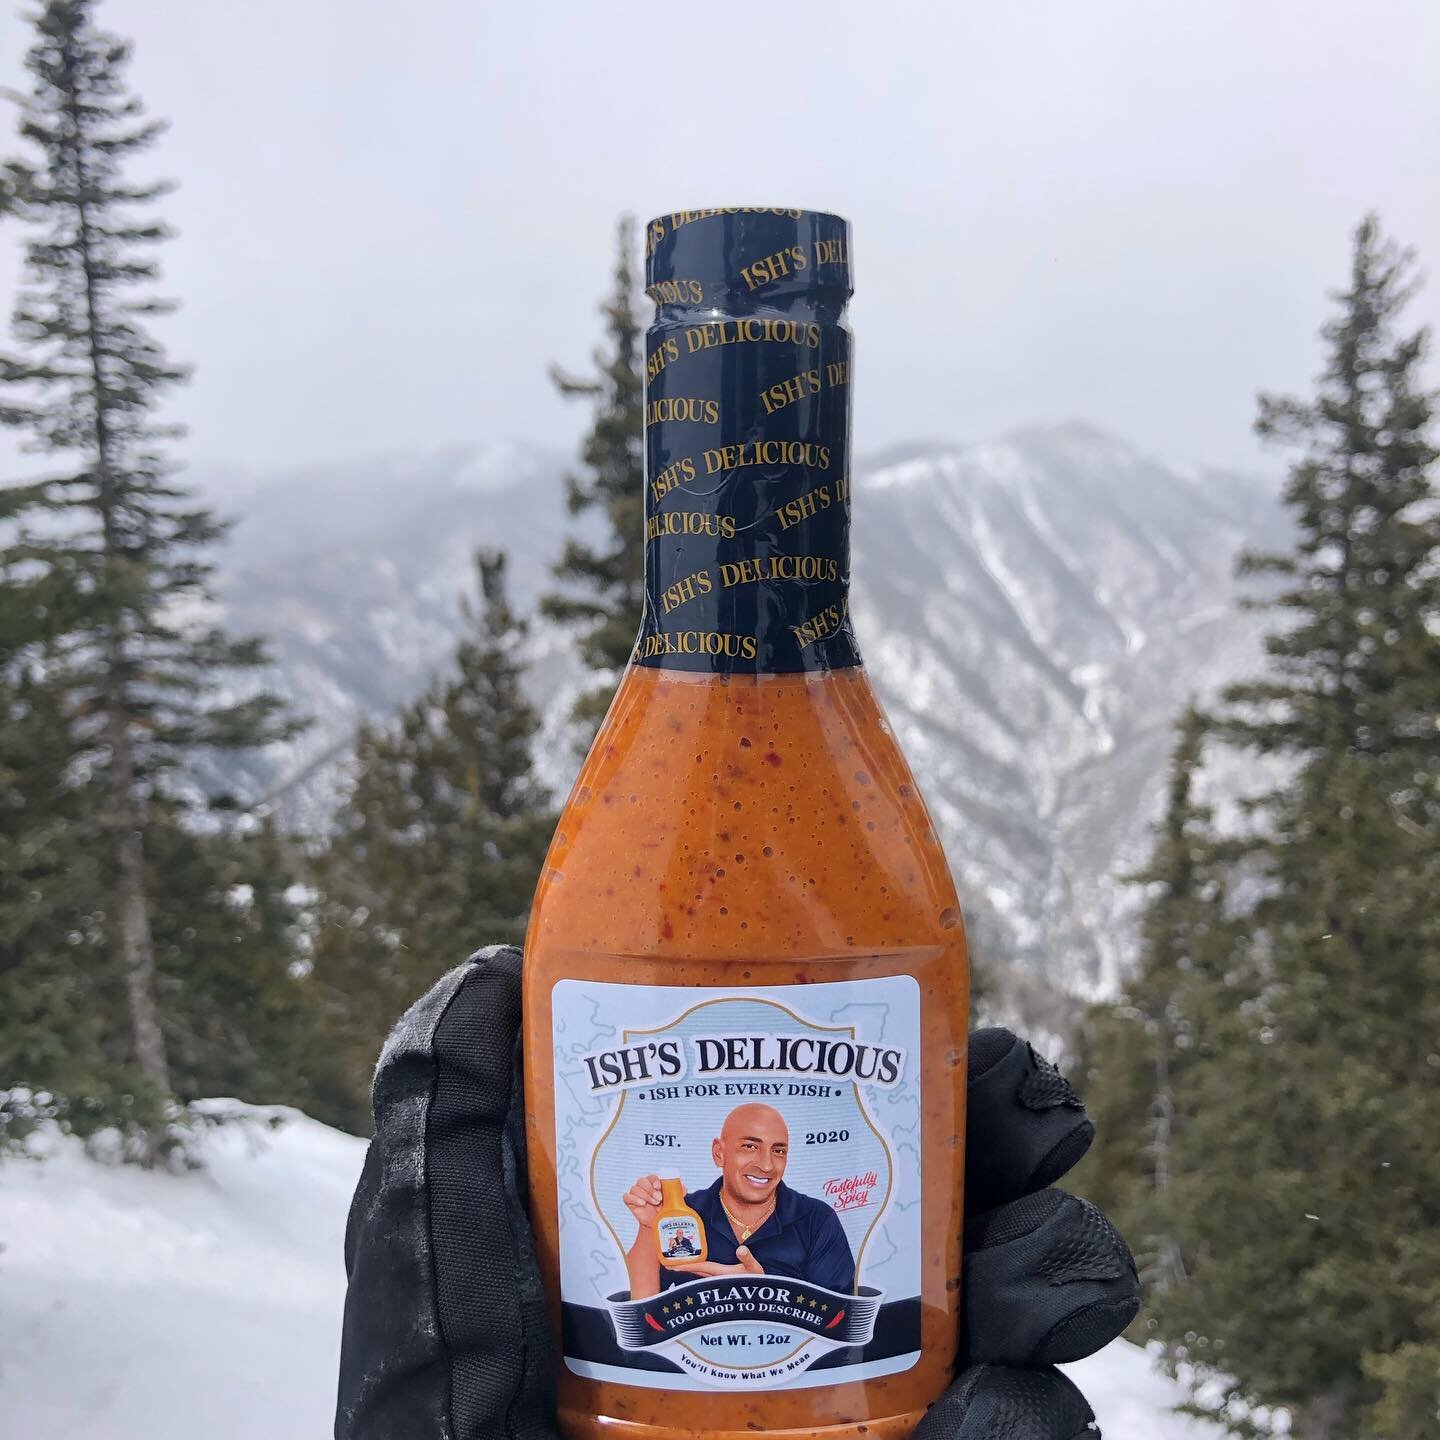 This bottle of Ish&rsquo;s Delicious was hauled on a 30 minute hike to the top of a 3 mile tree run.
@skitaos #WheresYourIsh? #ishsdelicious